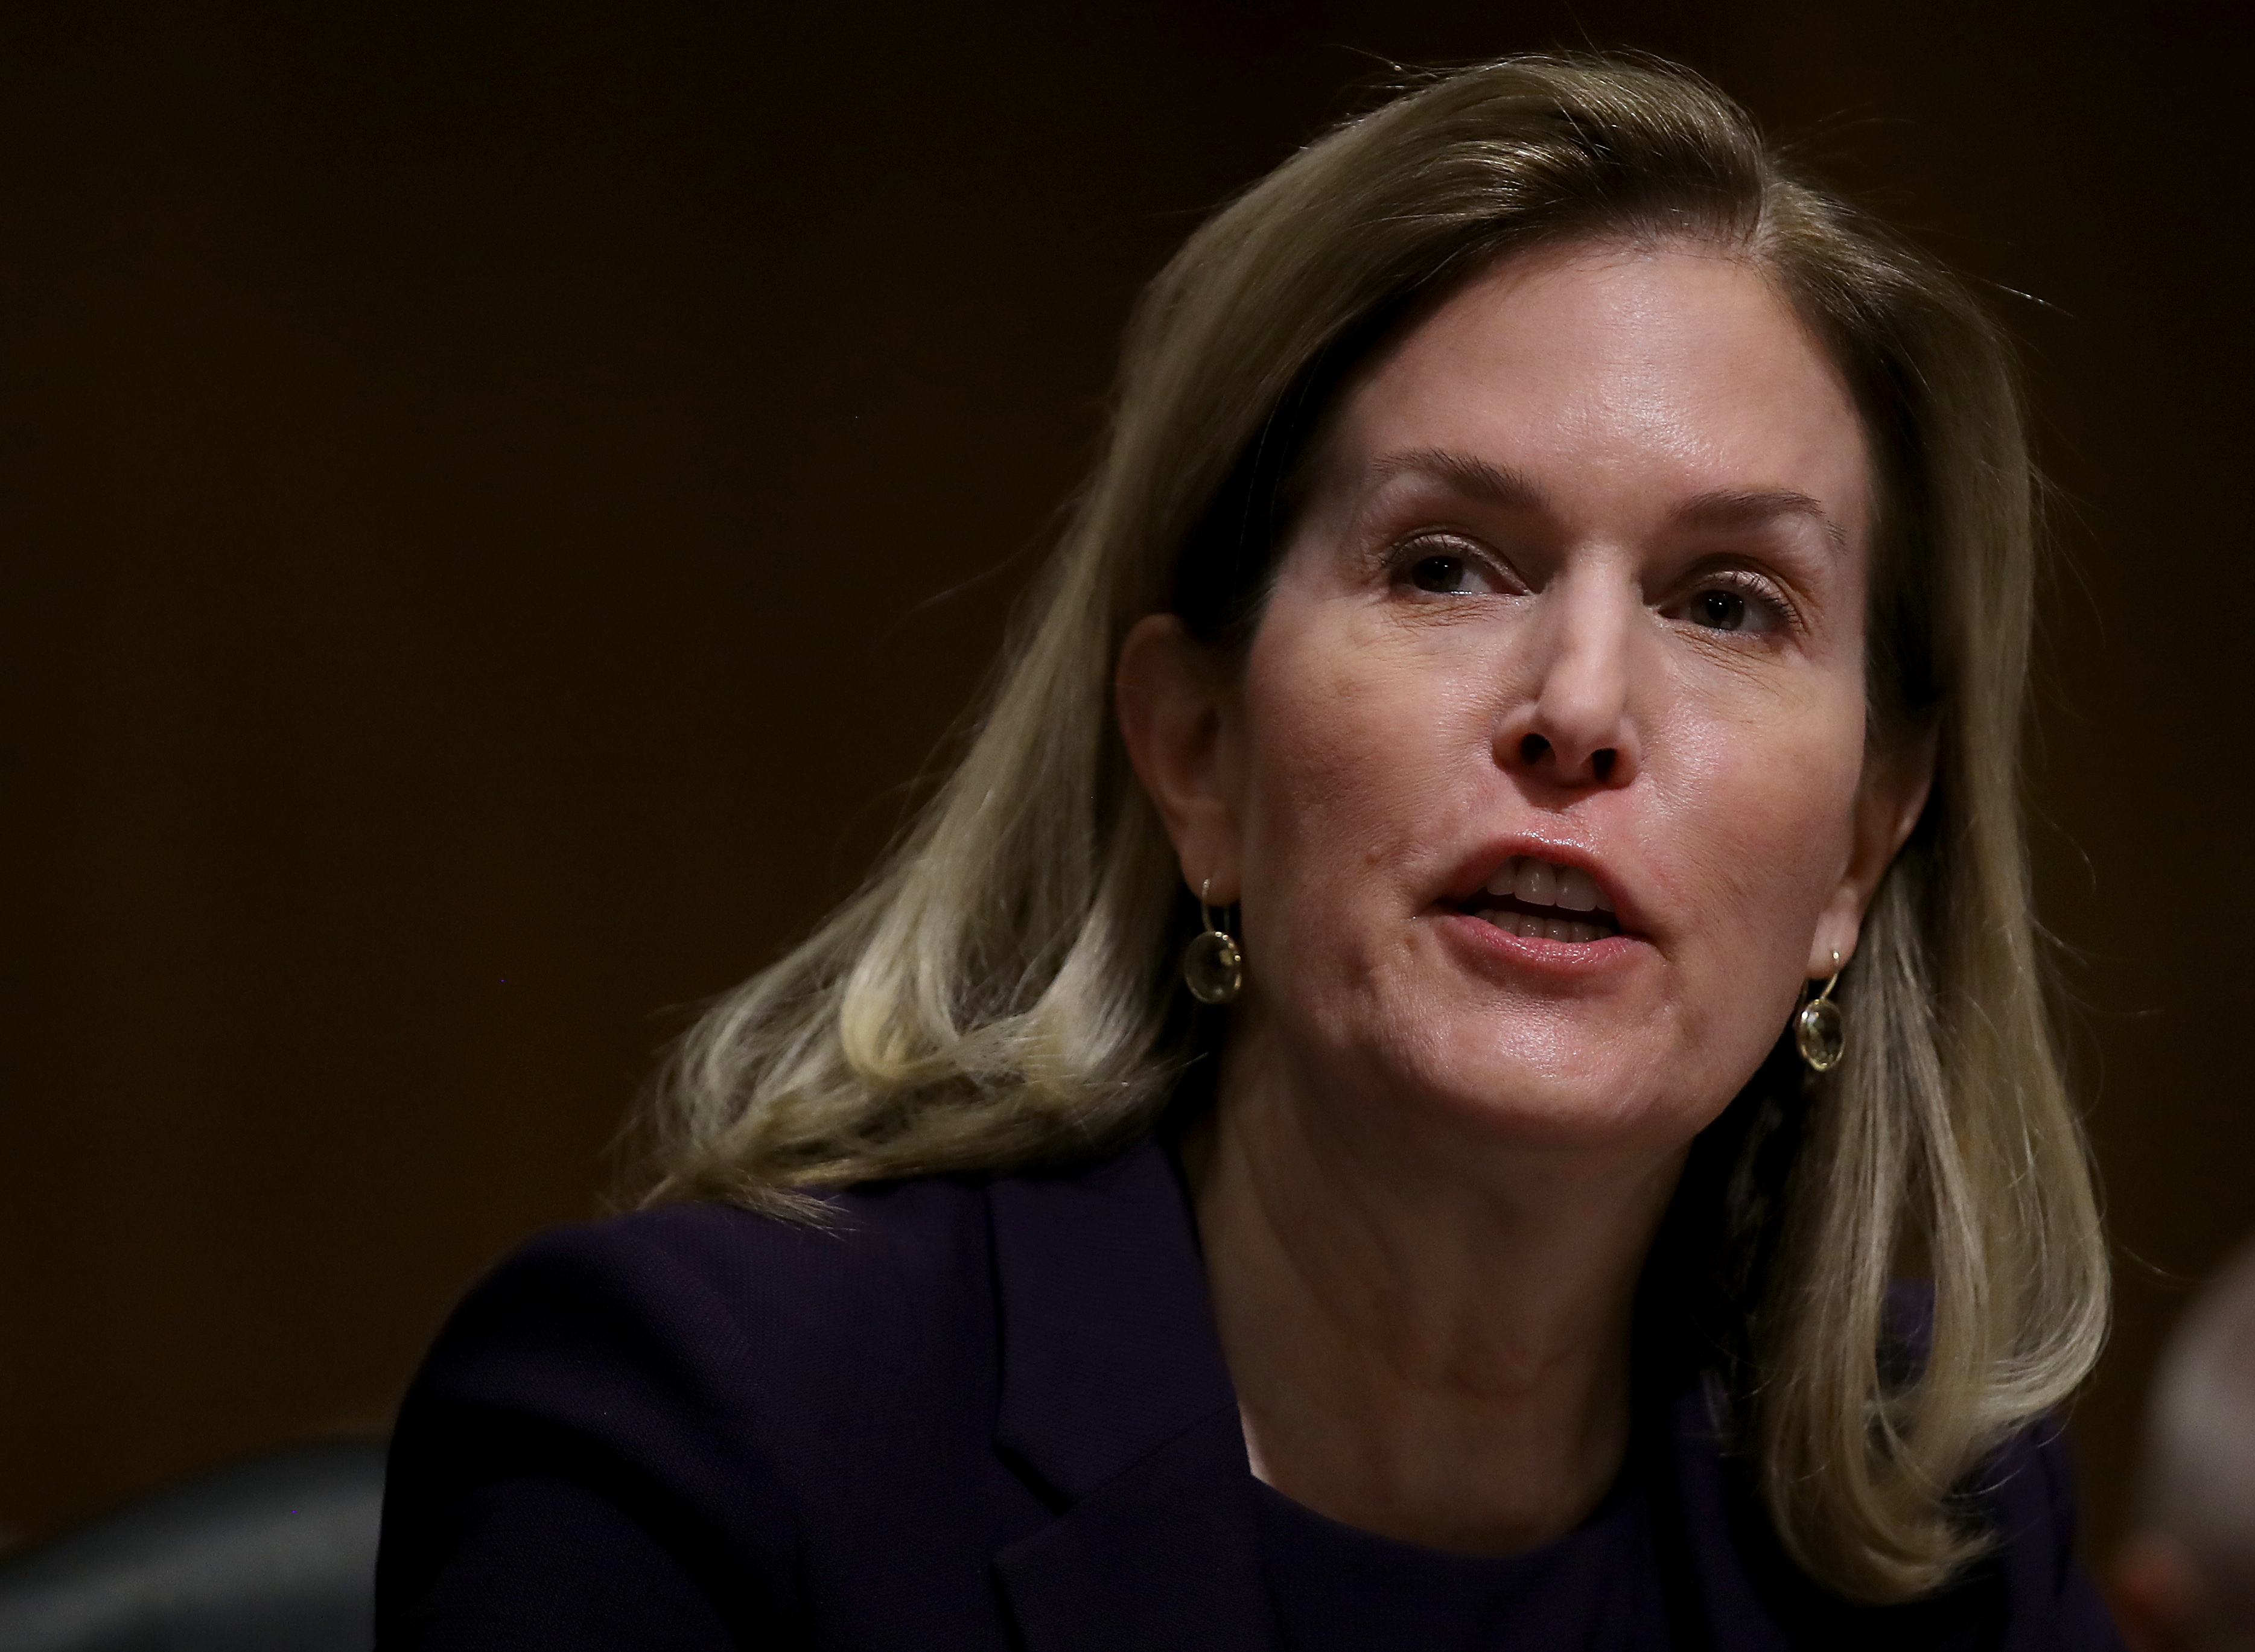 Jennifer Taubert, executive vice president and worldwide chairman of Janssen Pharmaceuticals, Johnson & Johnson, testifies before the Senate Finance Committee on "Drug Pricing in America: A Prescription for Change, Part II" February 26, 2019 in Washington, DC. (Photo by Win McNamee/Getty Images)